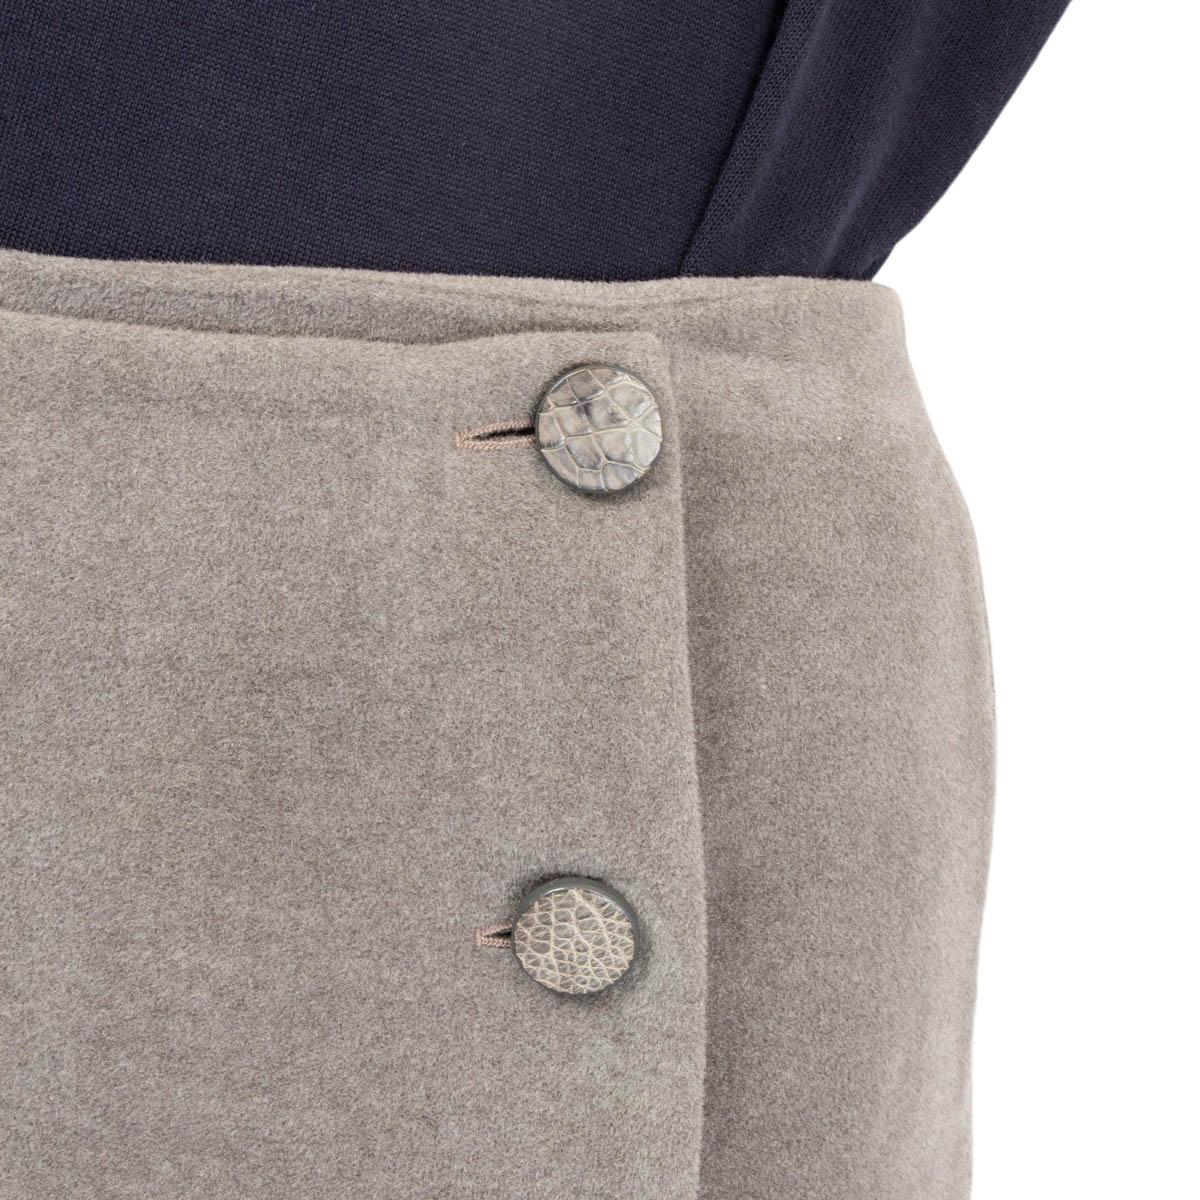 100% authentic Loro Piana wrap pencil skirt in gray cashmere (assumed cause tag is missing). Opens with six crocodile covered buttons on the front. Lined in silk (assumed cause tag is missing). Has been worn and is in excellent condition. Comes with